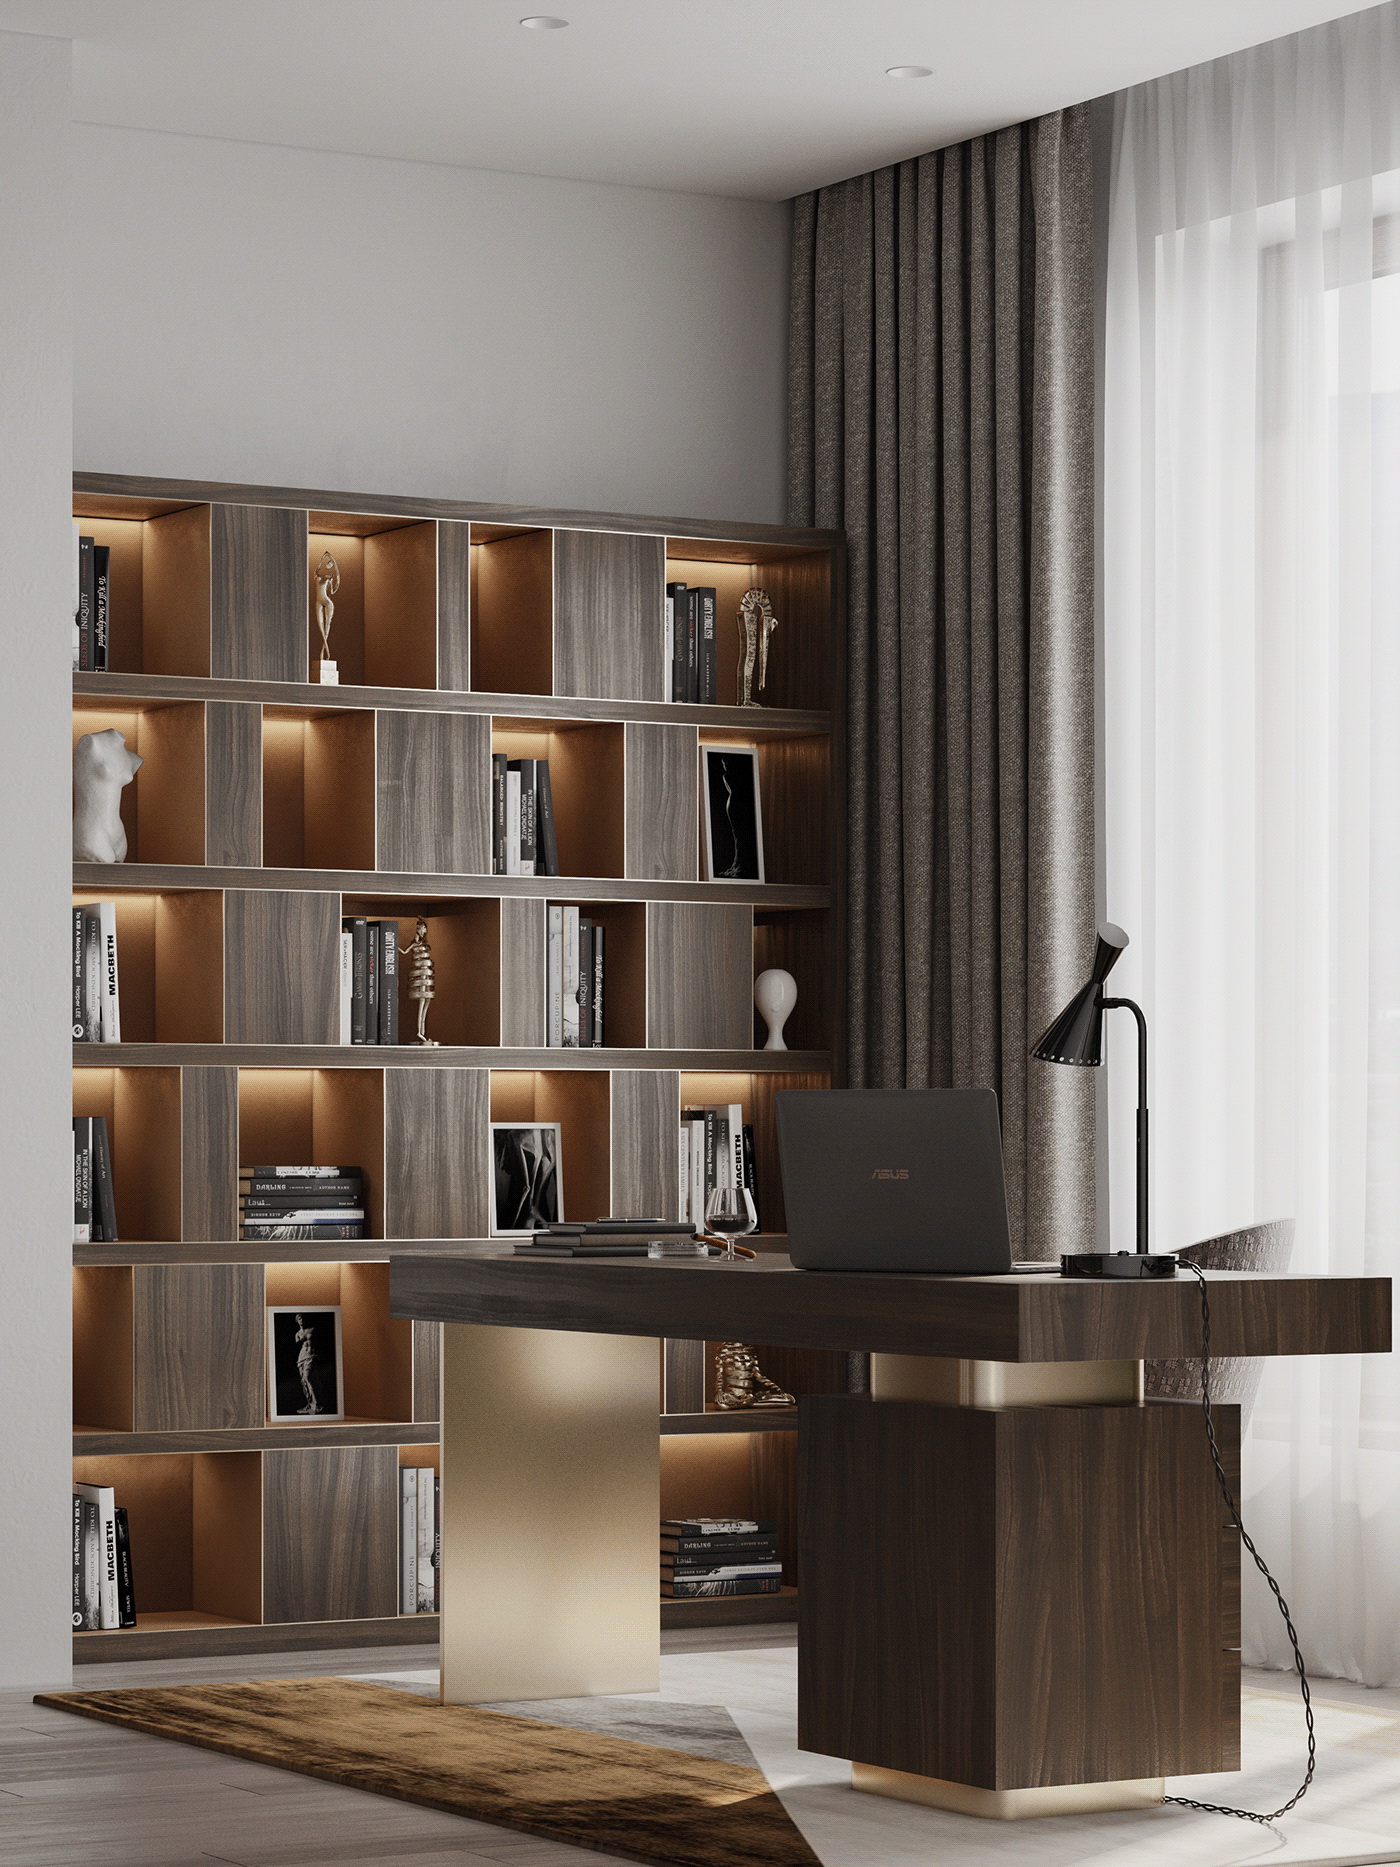 A wooden bookcase with many compartments is used to decorate the working corner more professionally and to display and store books.